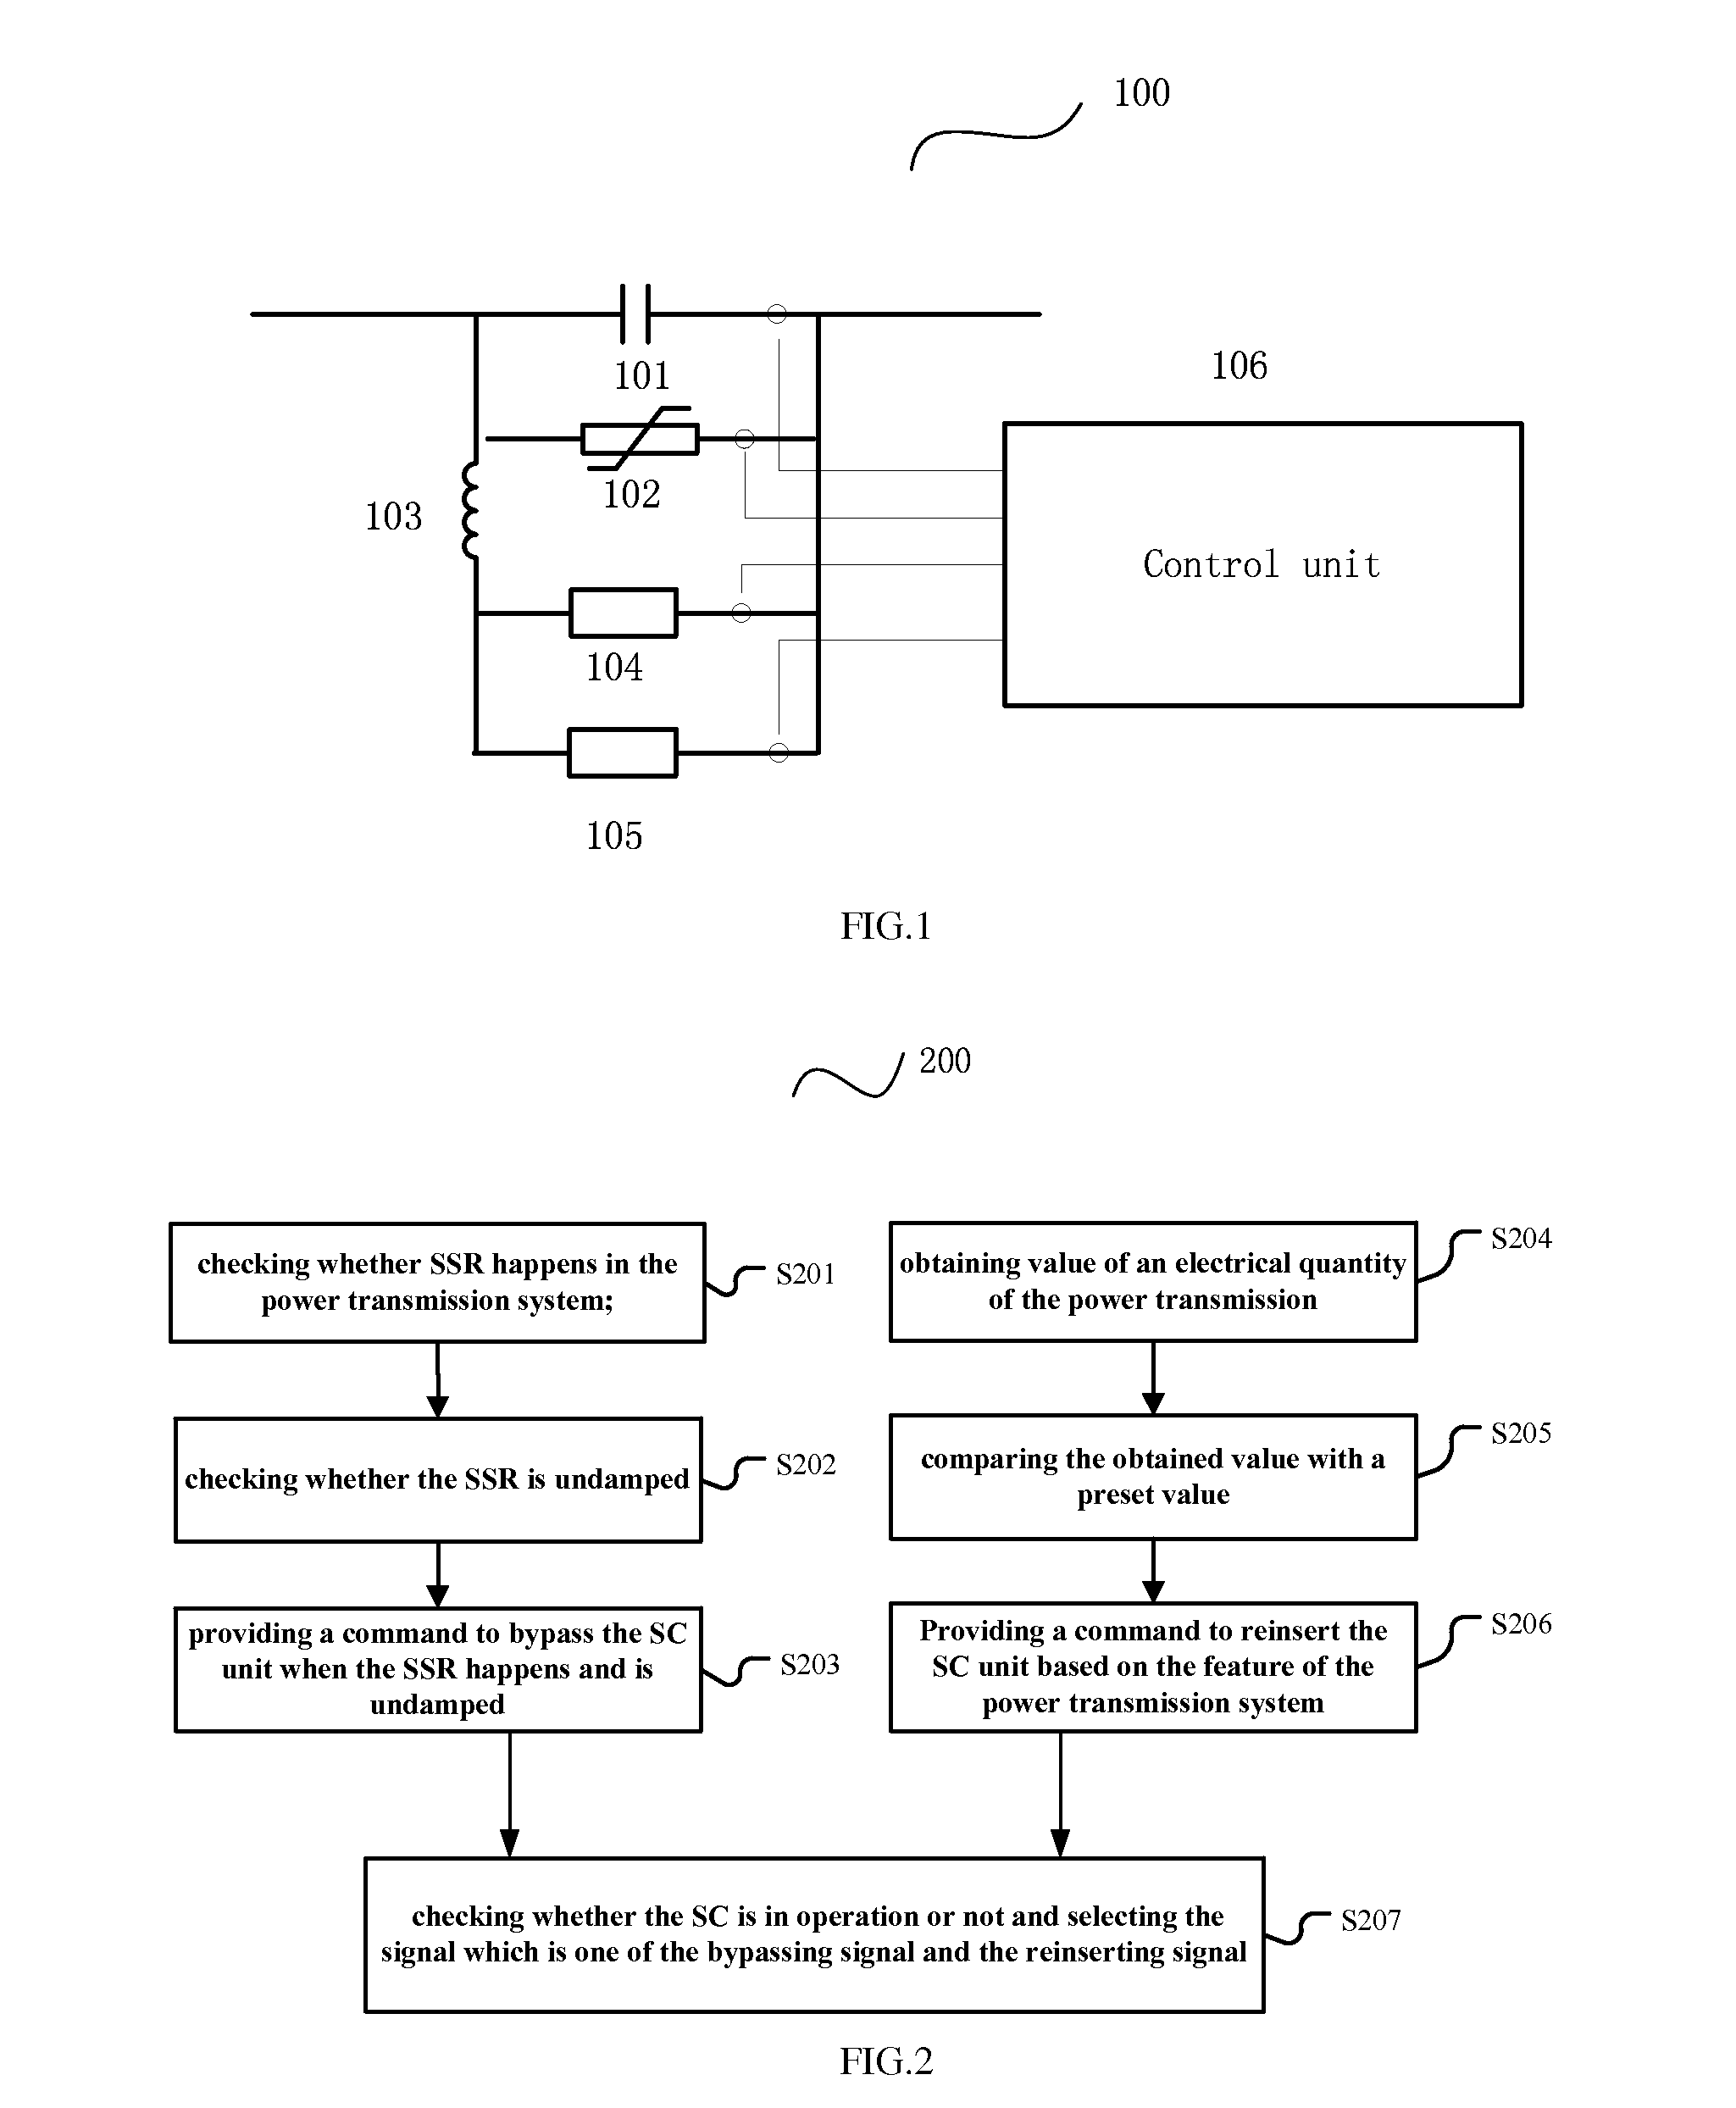 Method and apparatus for mitigating sub-synchronous resonance in power transmission system